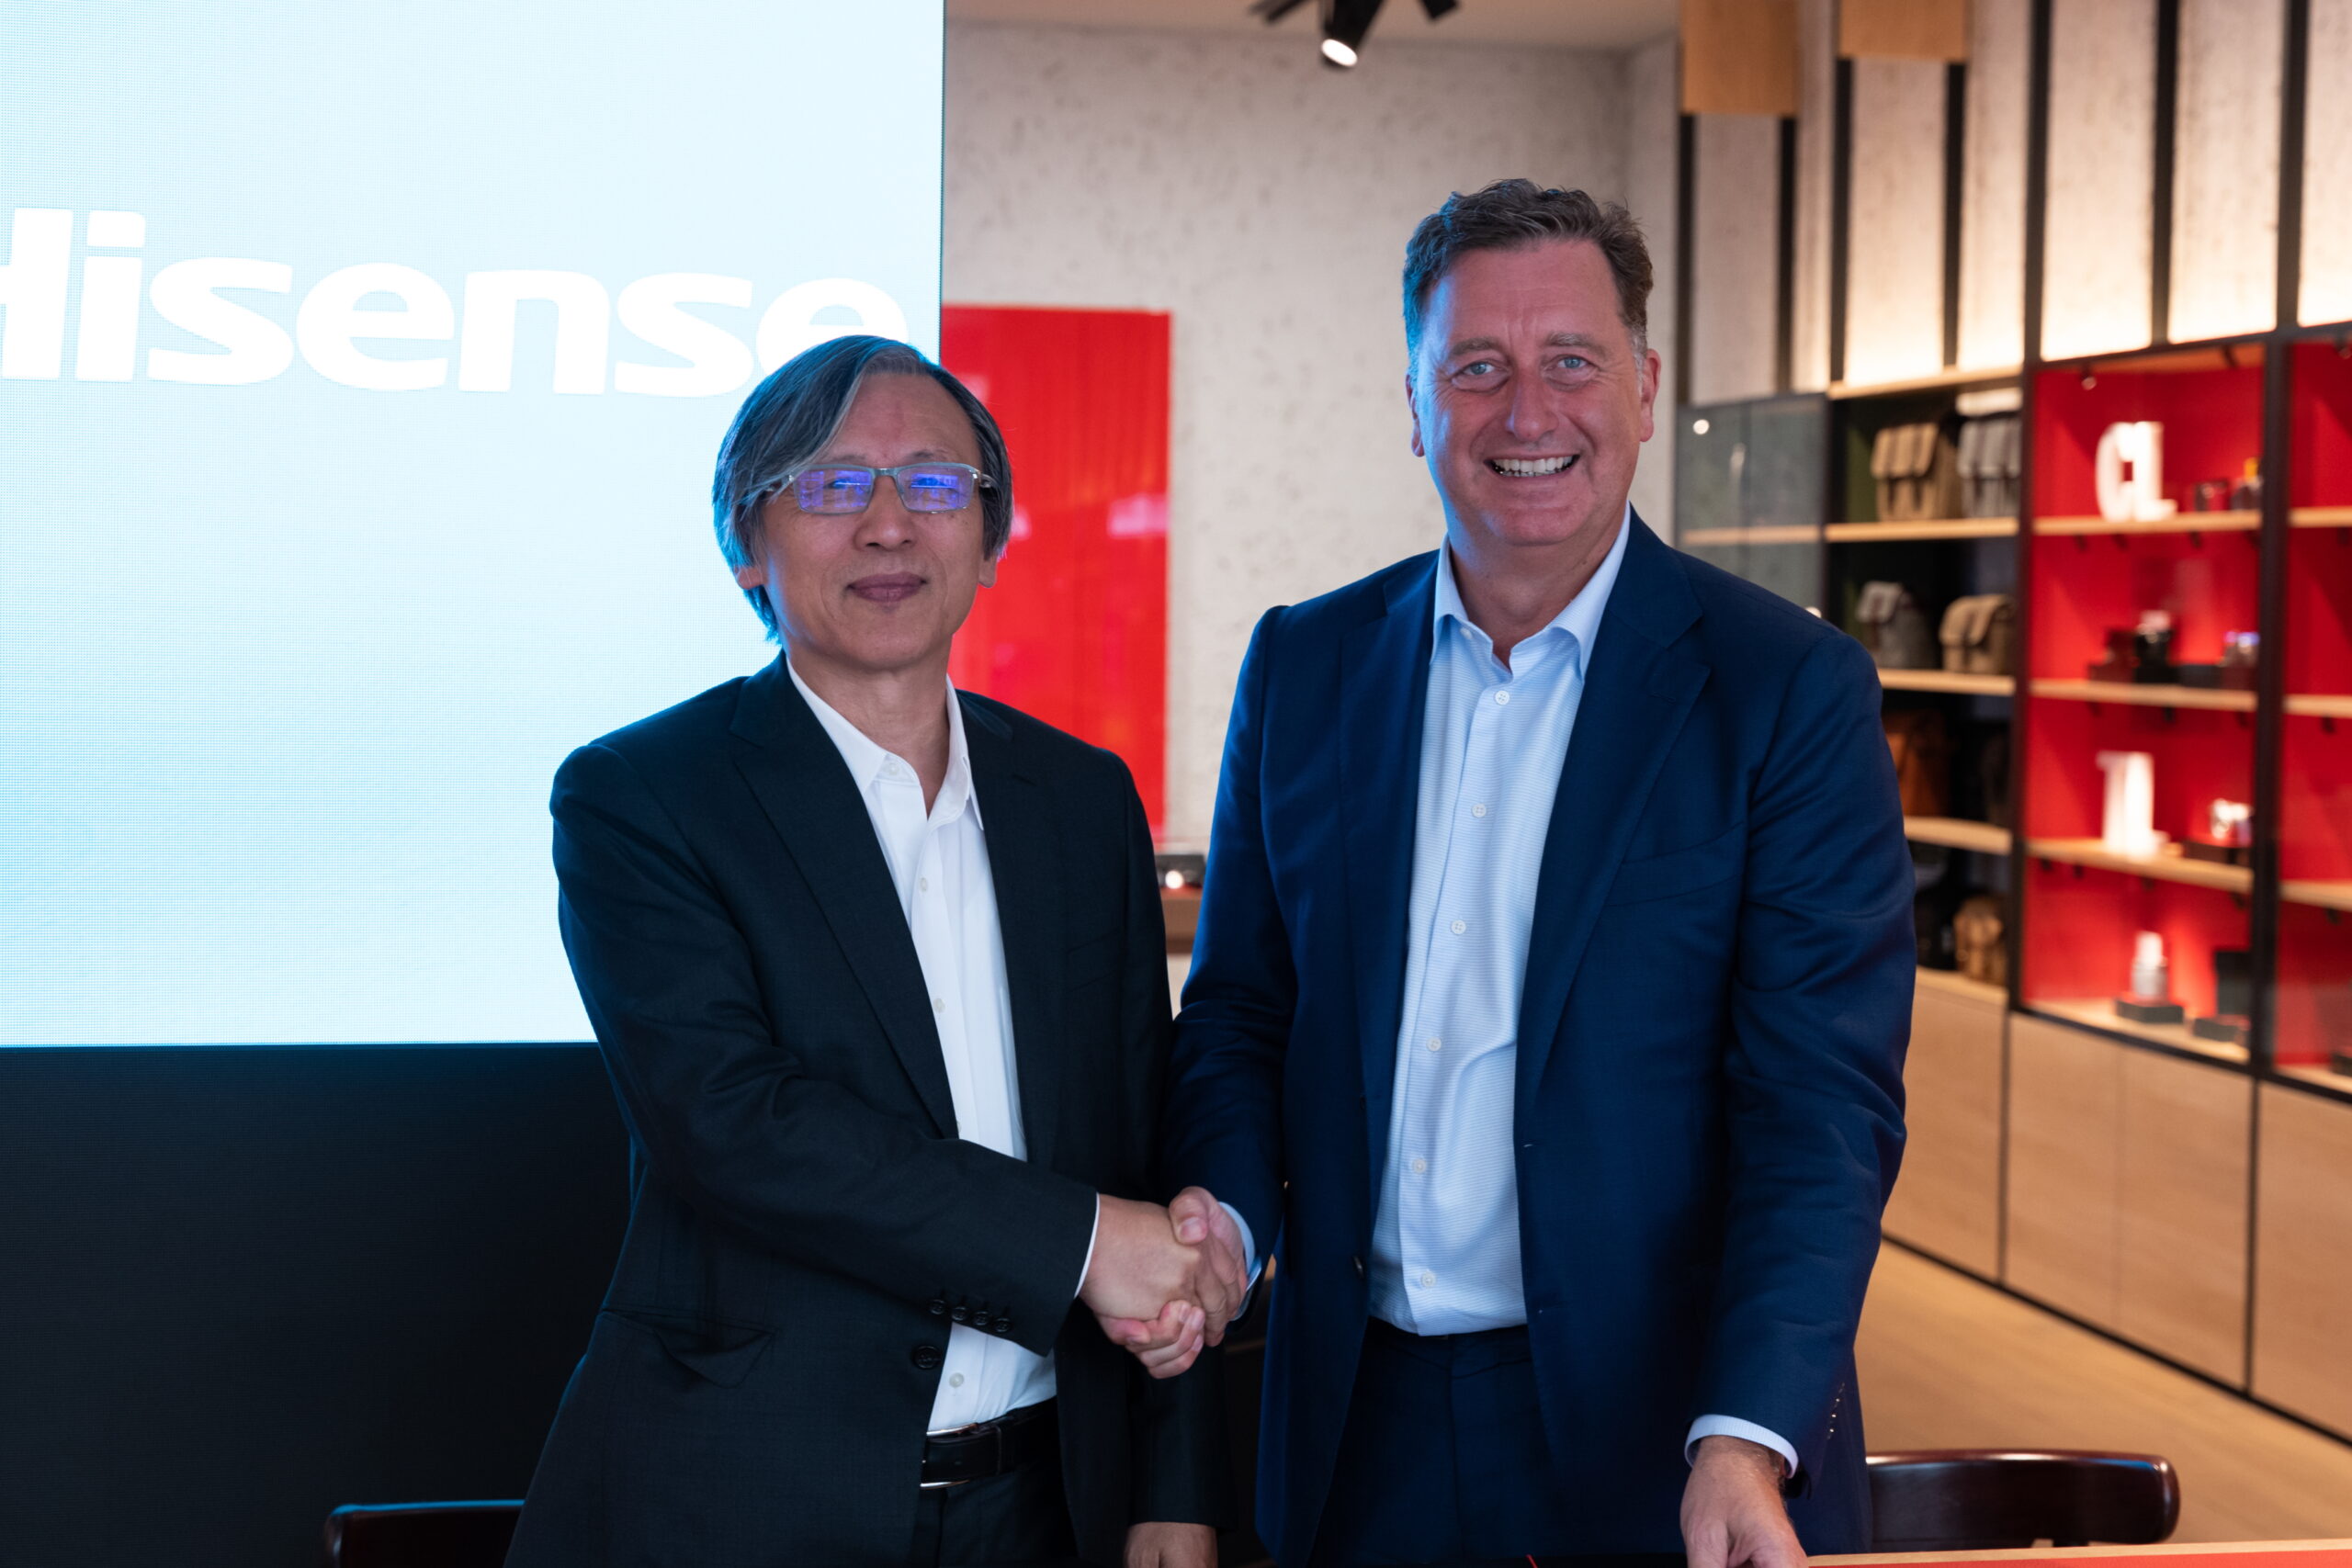 Leicas expansion into the laser TV market goes full steam ahead with Hisense partnership